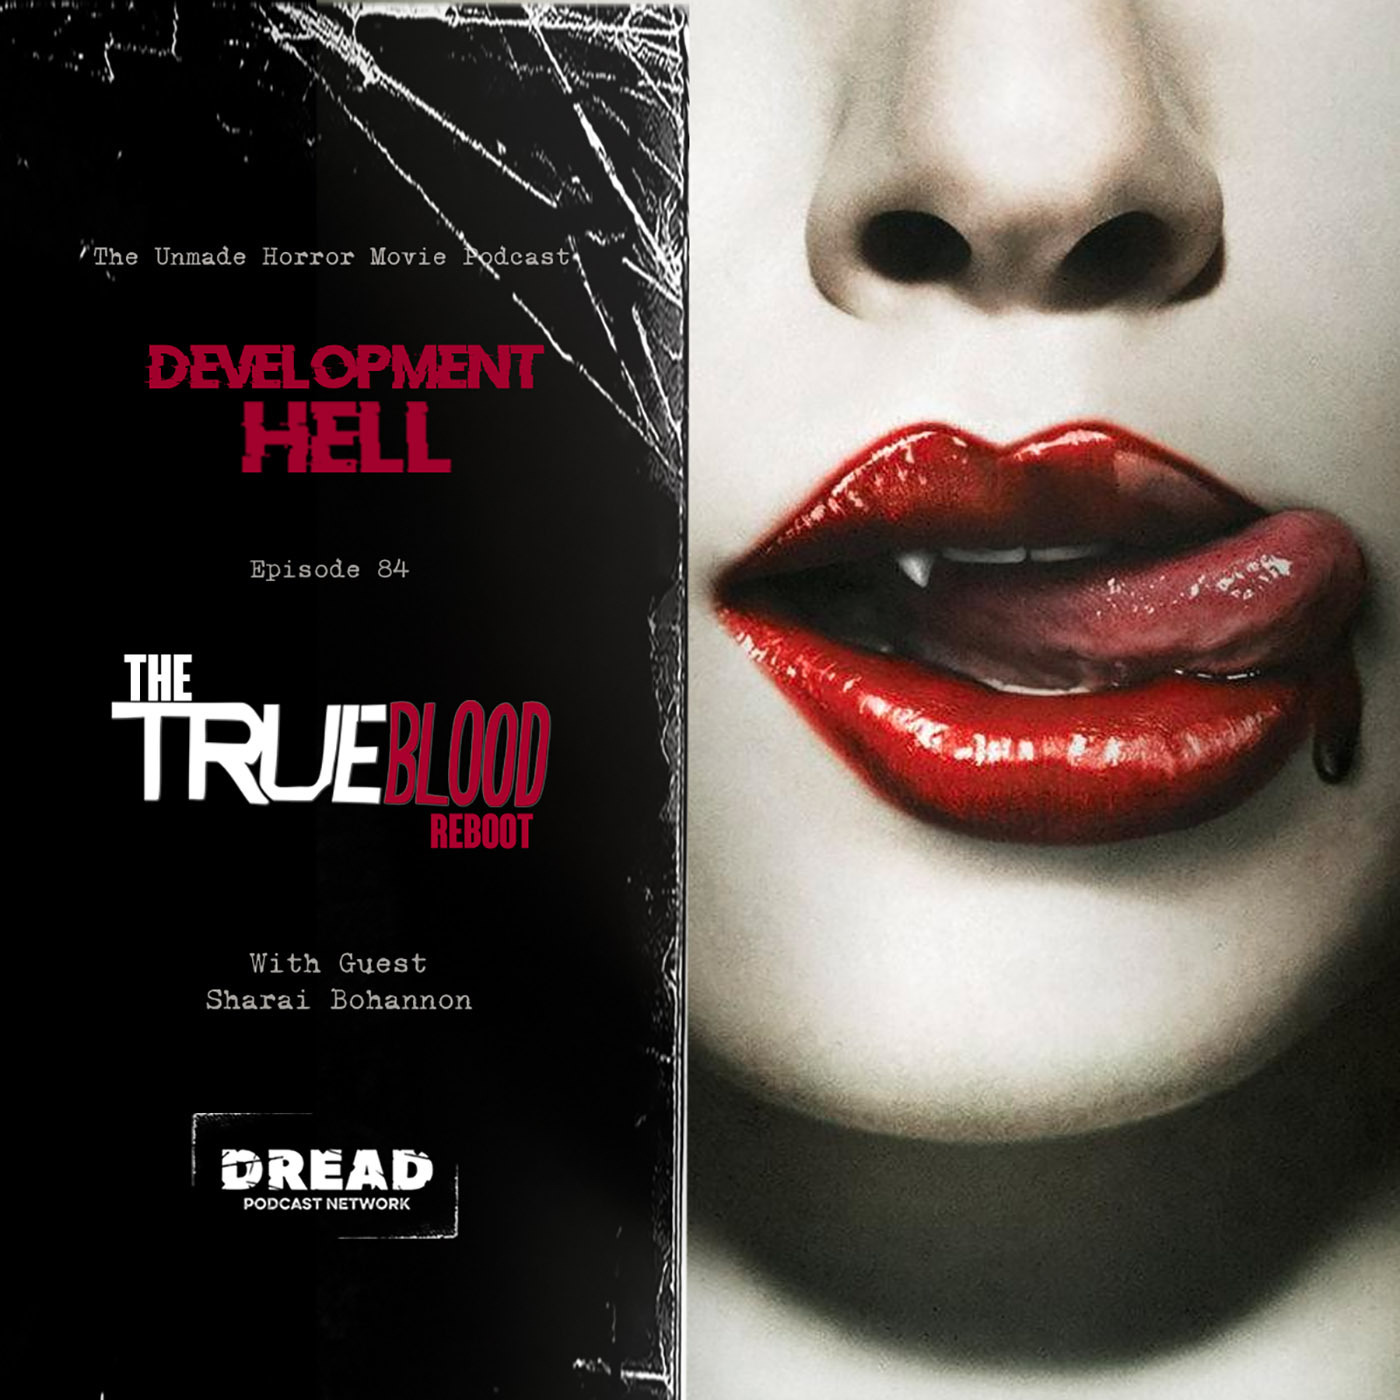 TRUE BLOOD: THE REBOOT (with Sharai Bohannon)